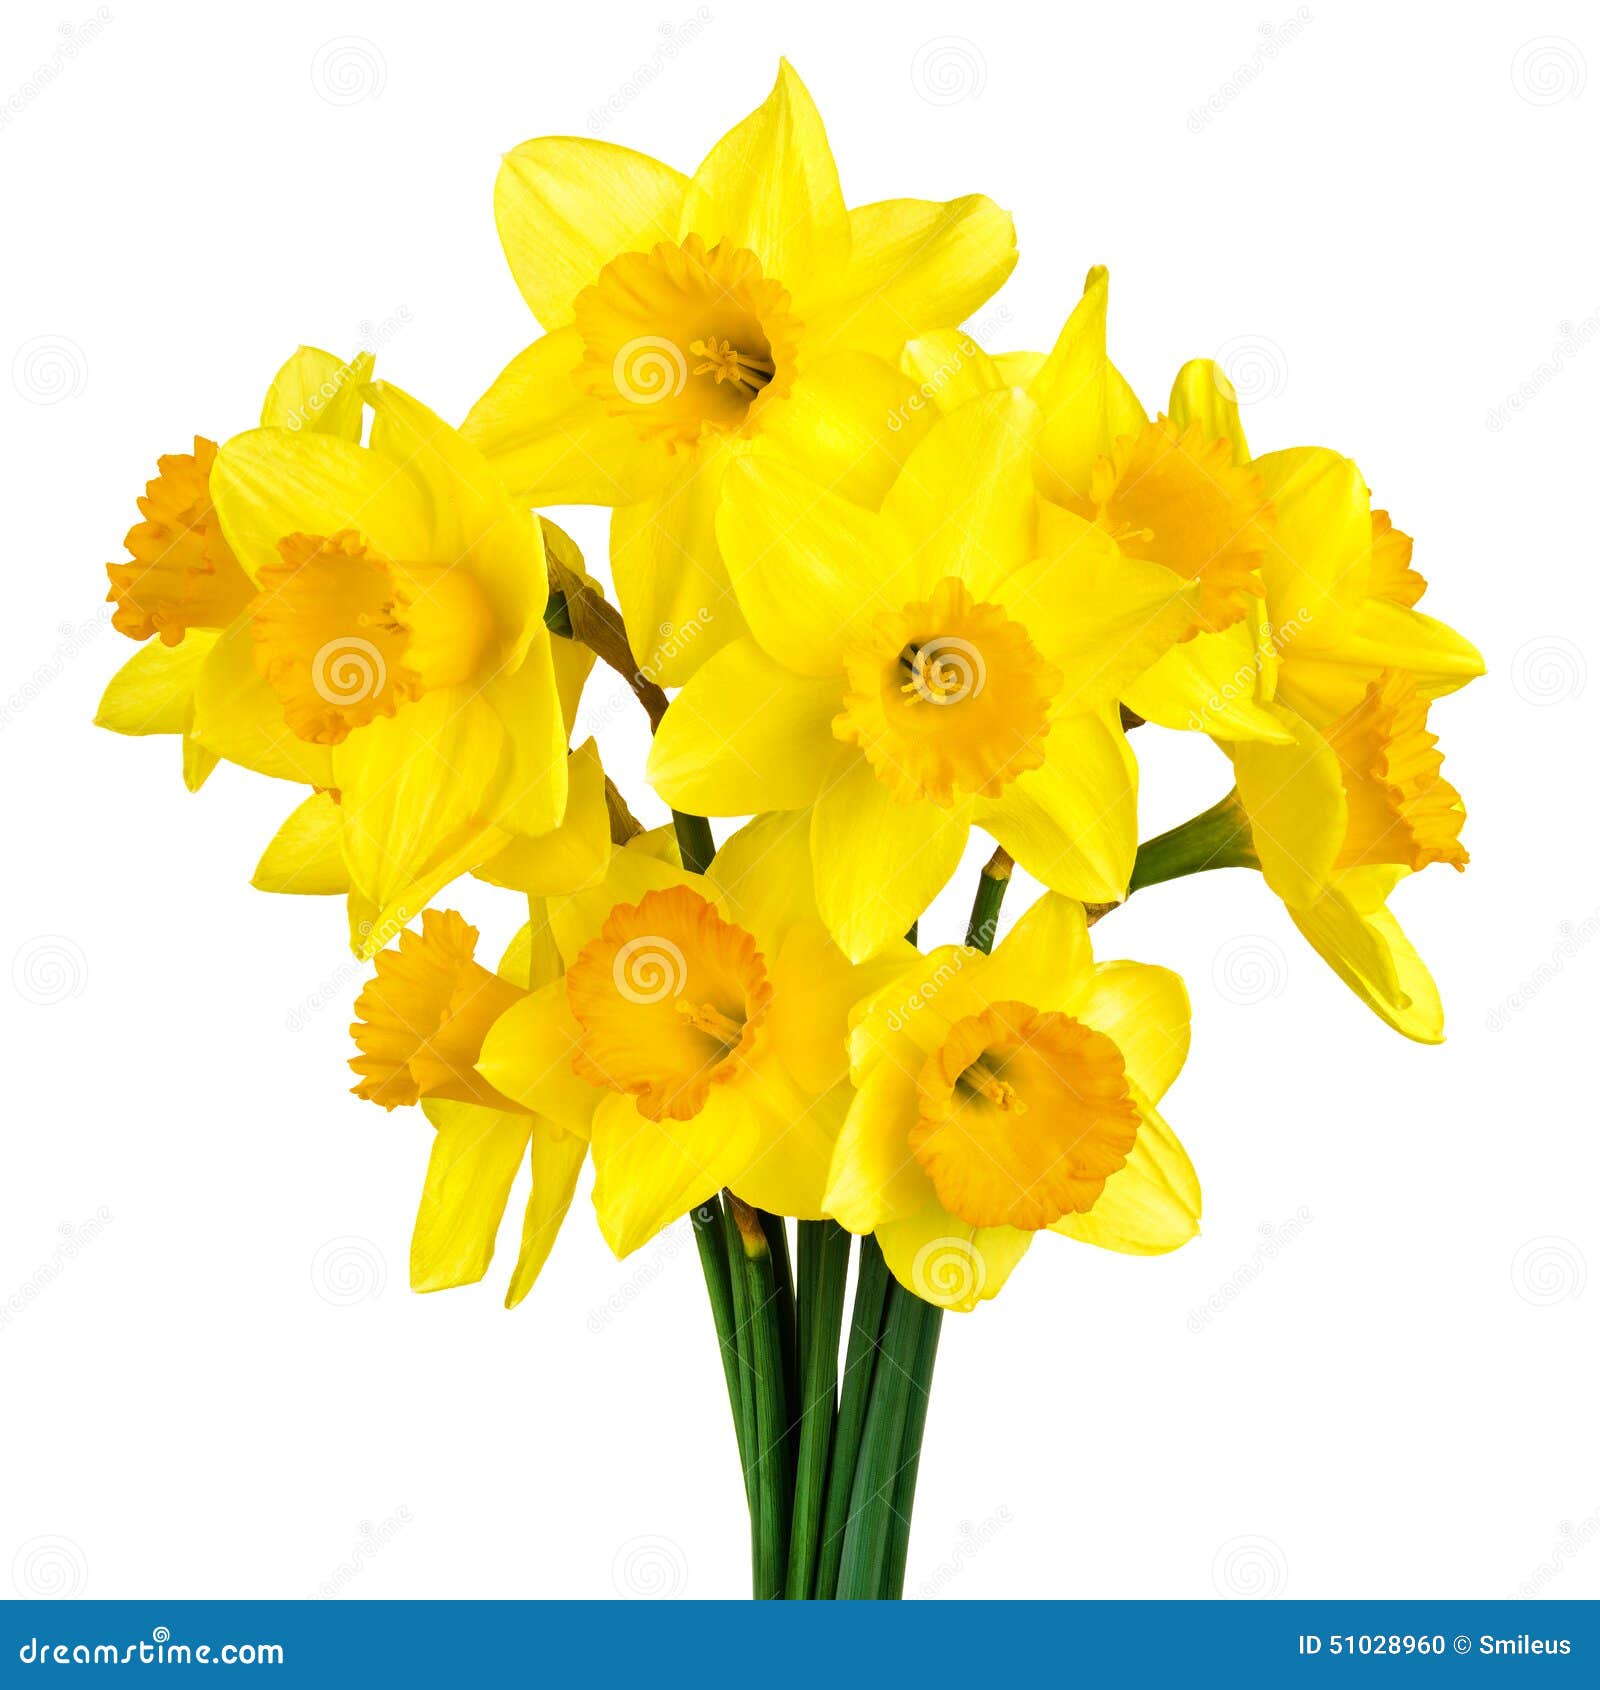 blossoming daffodils  on white